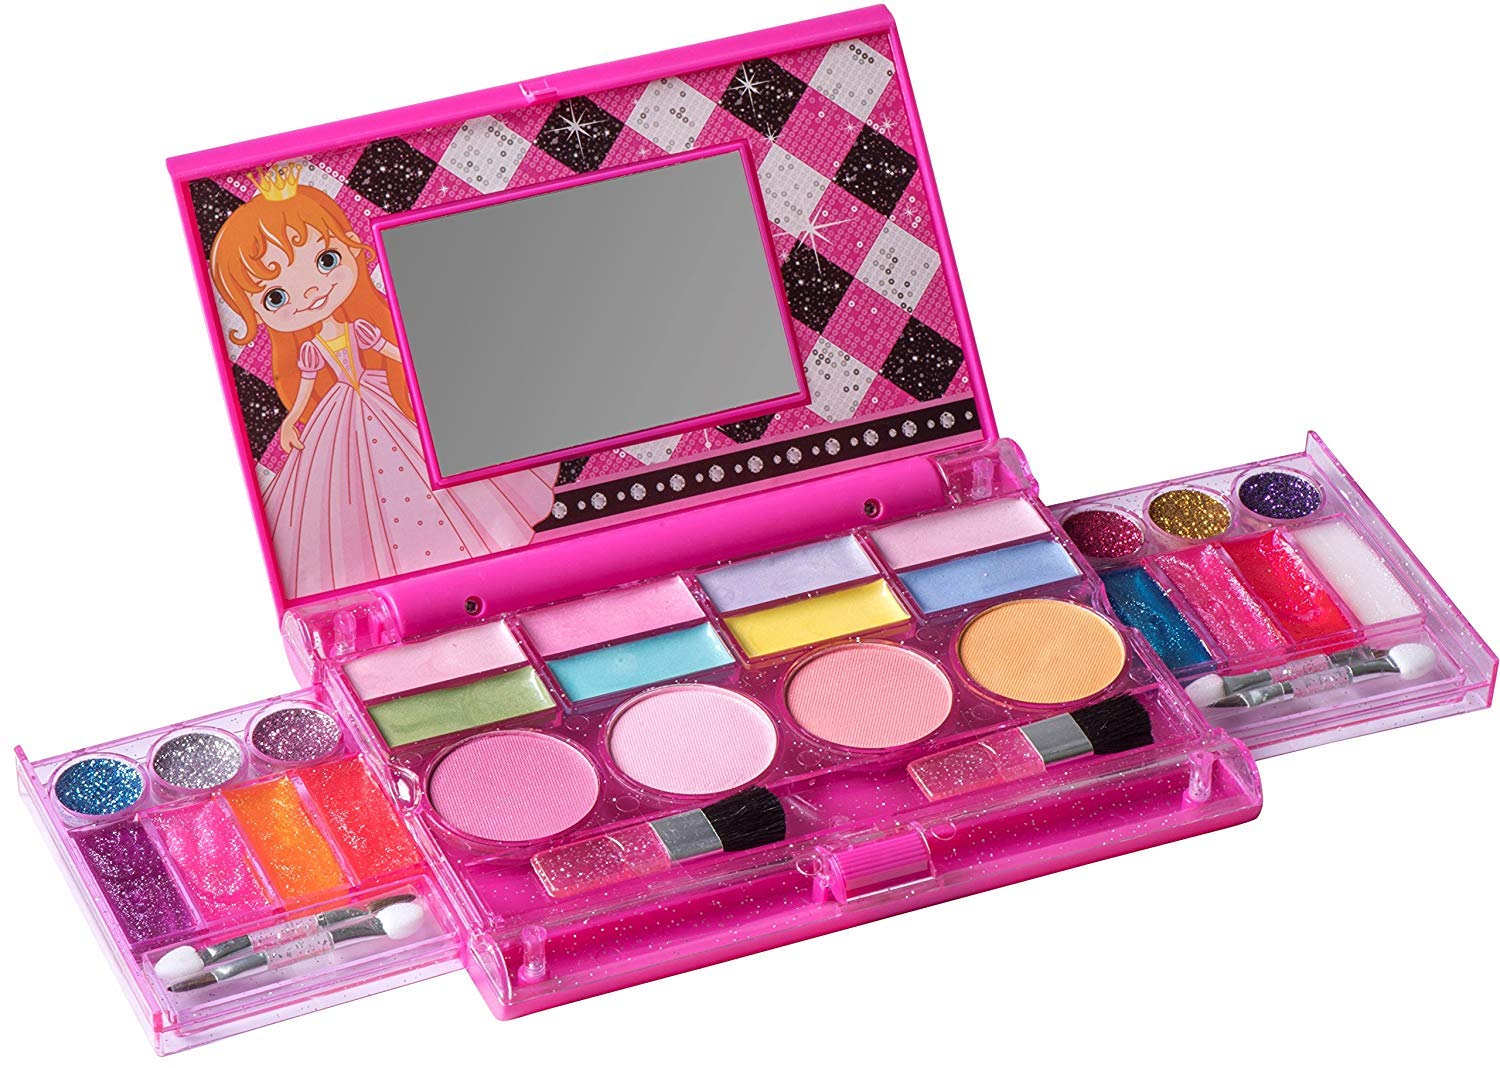 PlaykizPlaykidz: My First Princess Makeup Chest, Girl's All-In-One Deluxe Cosmetic and Real Makeup Palette with Mirror (Washable) - image 1 of 5